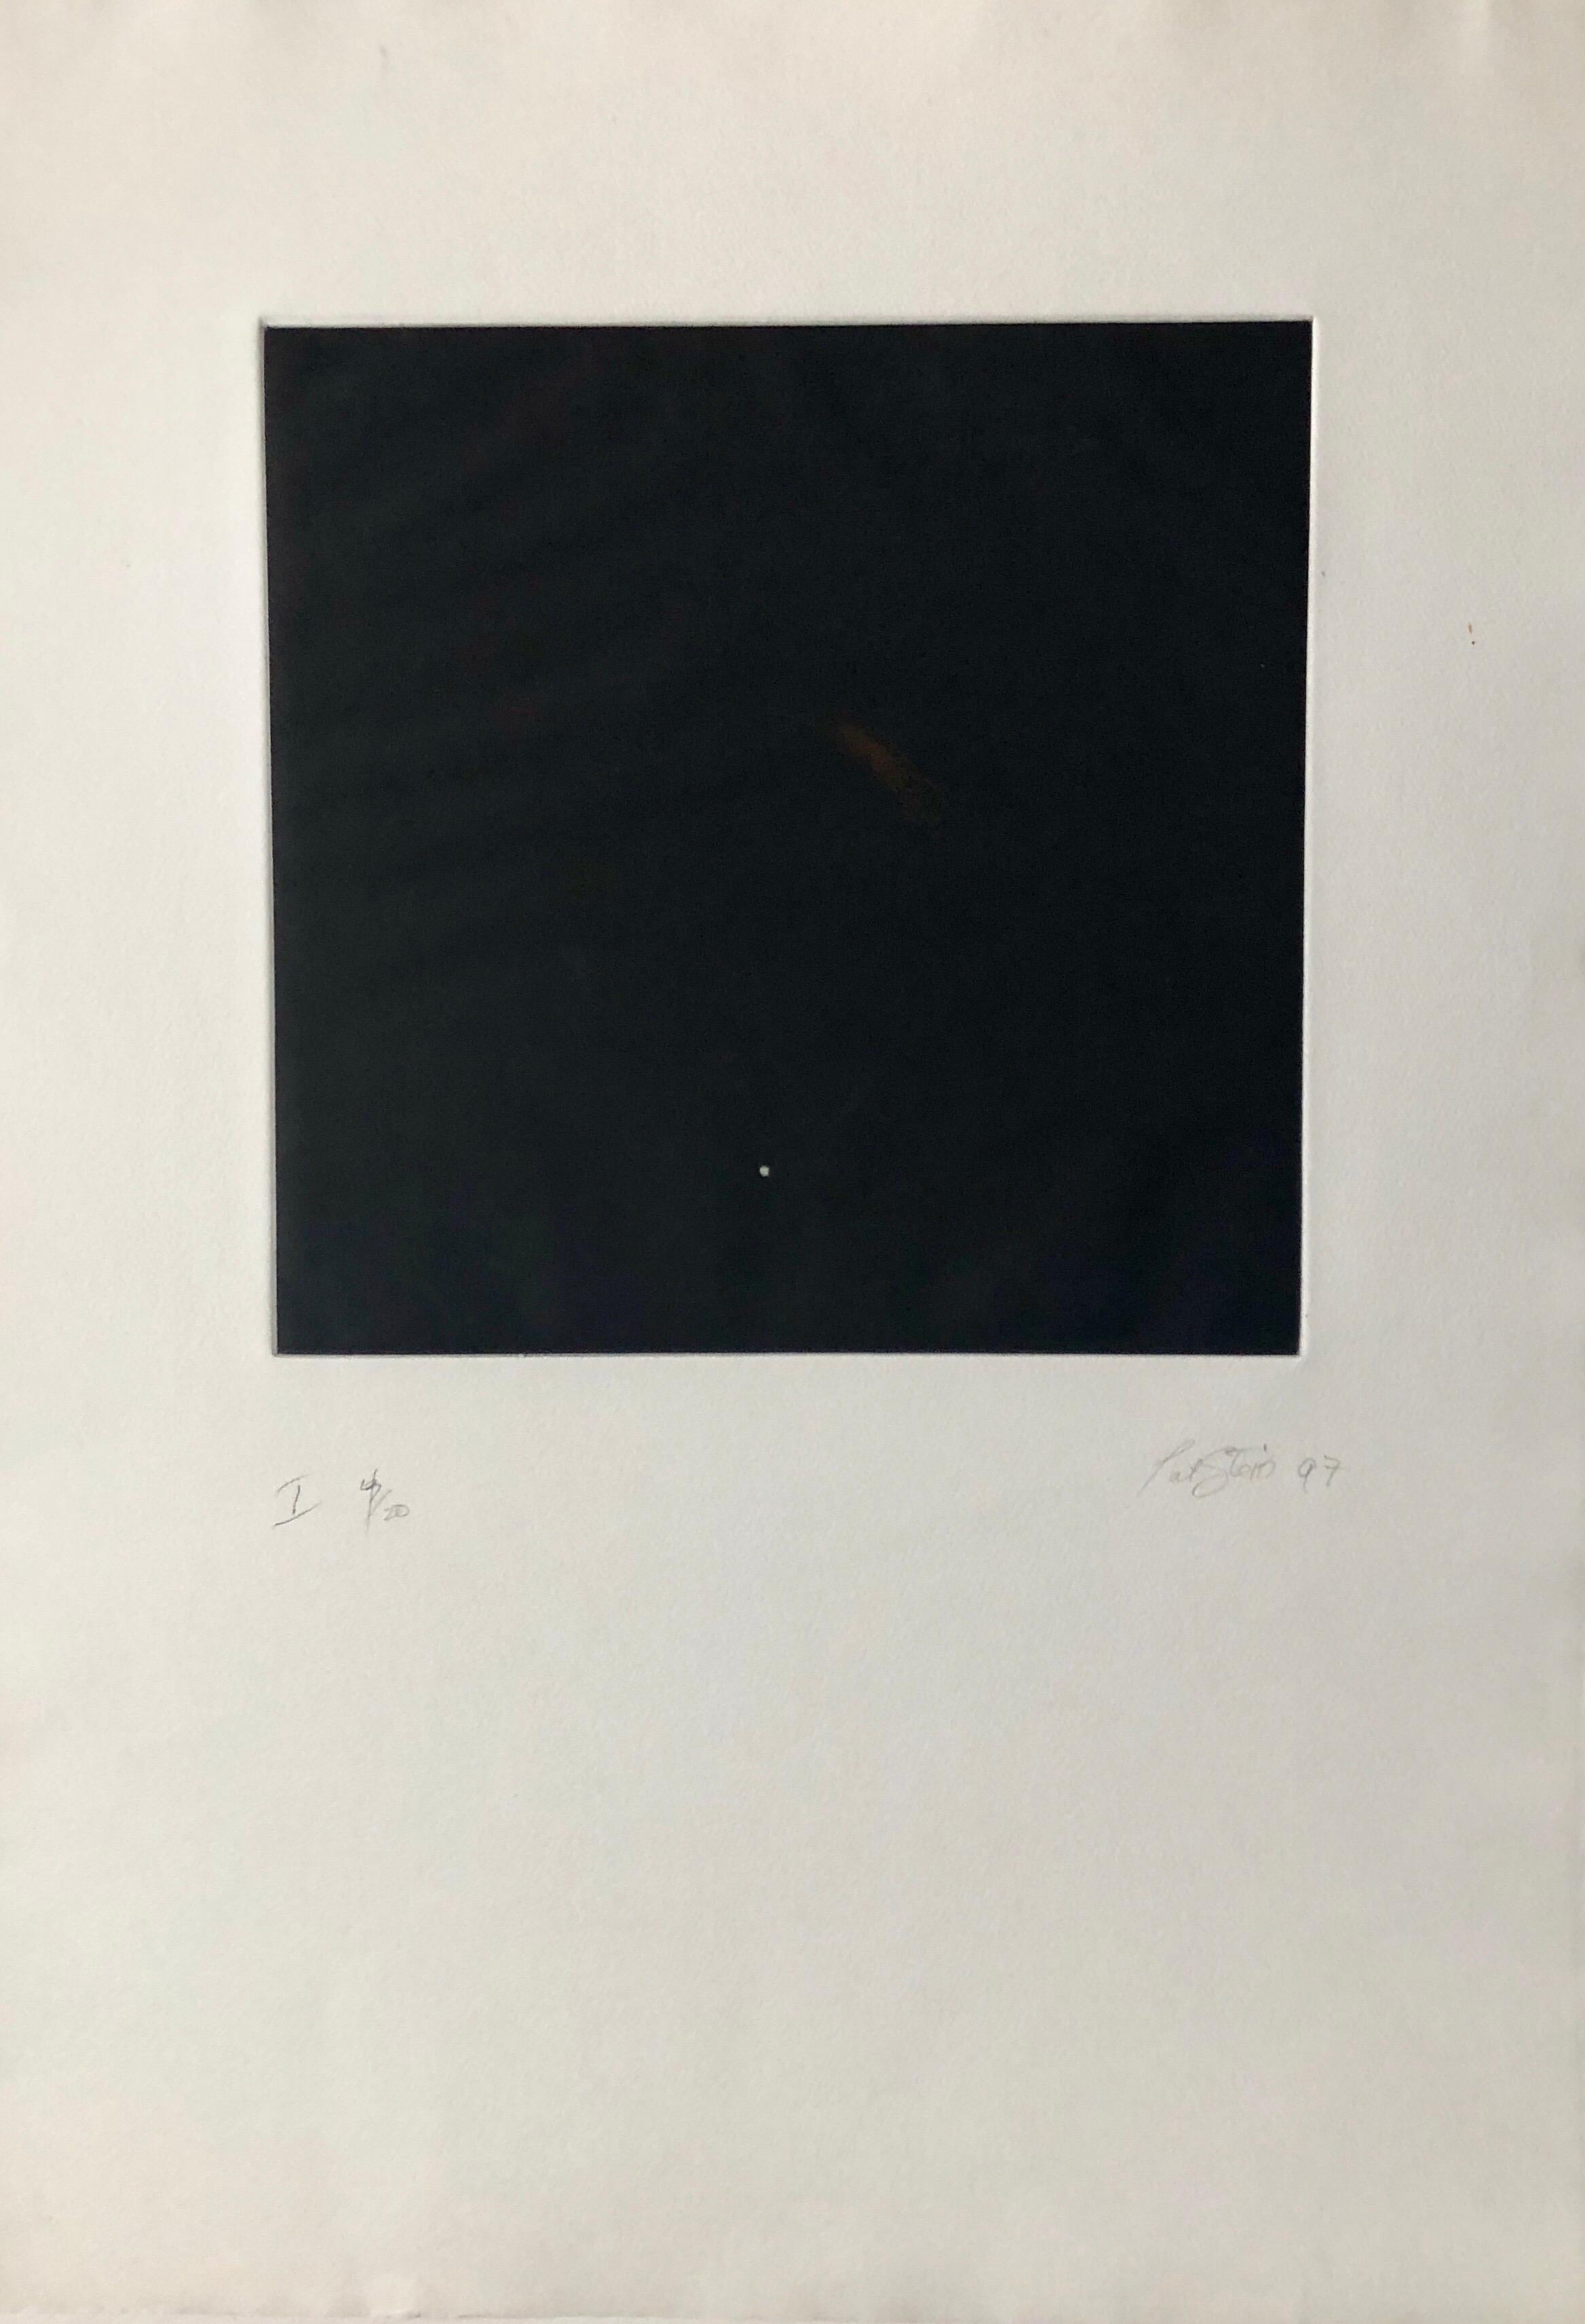 Comet, Outer Space Dark Series Aquatint Etching Color Abstract Expressionist  For Sale 1